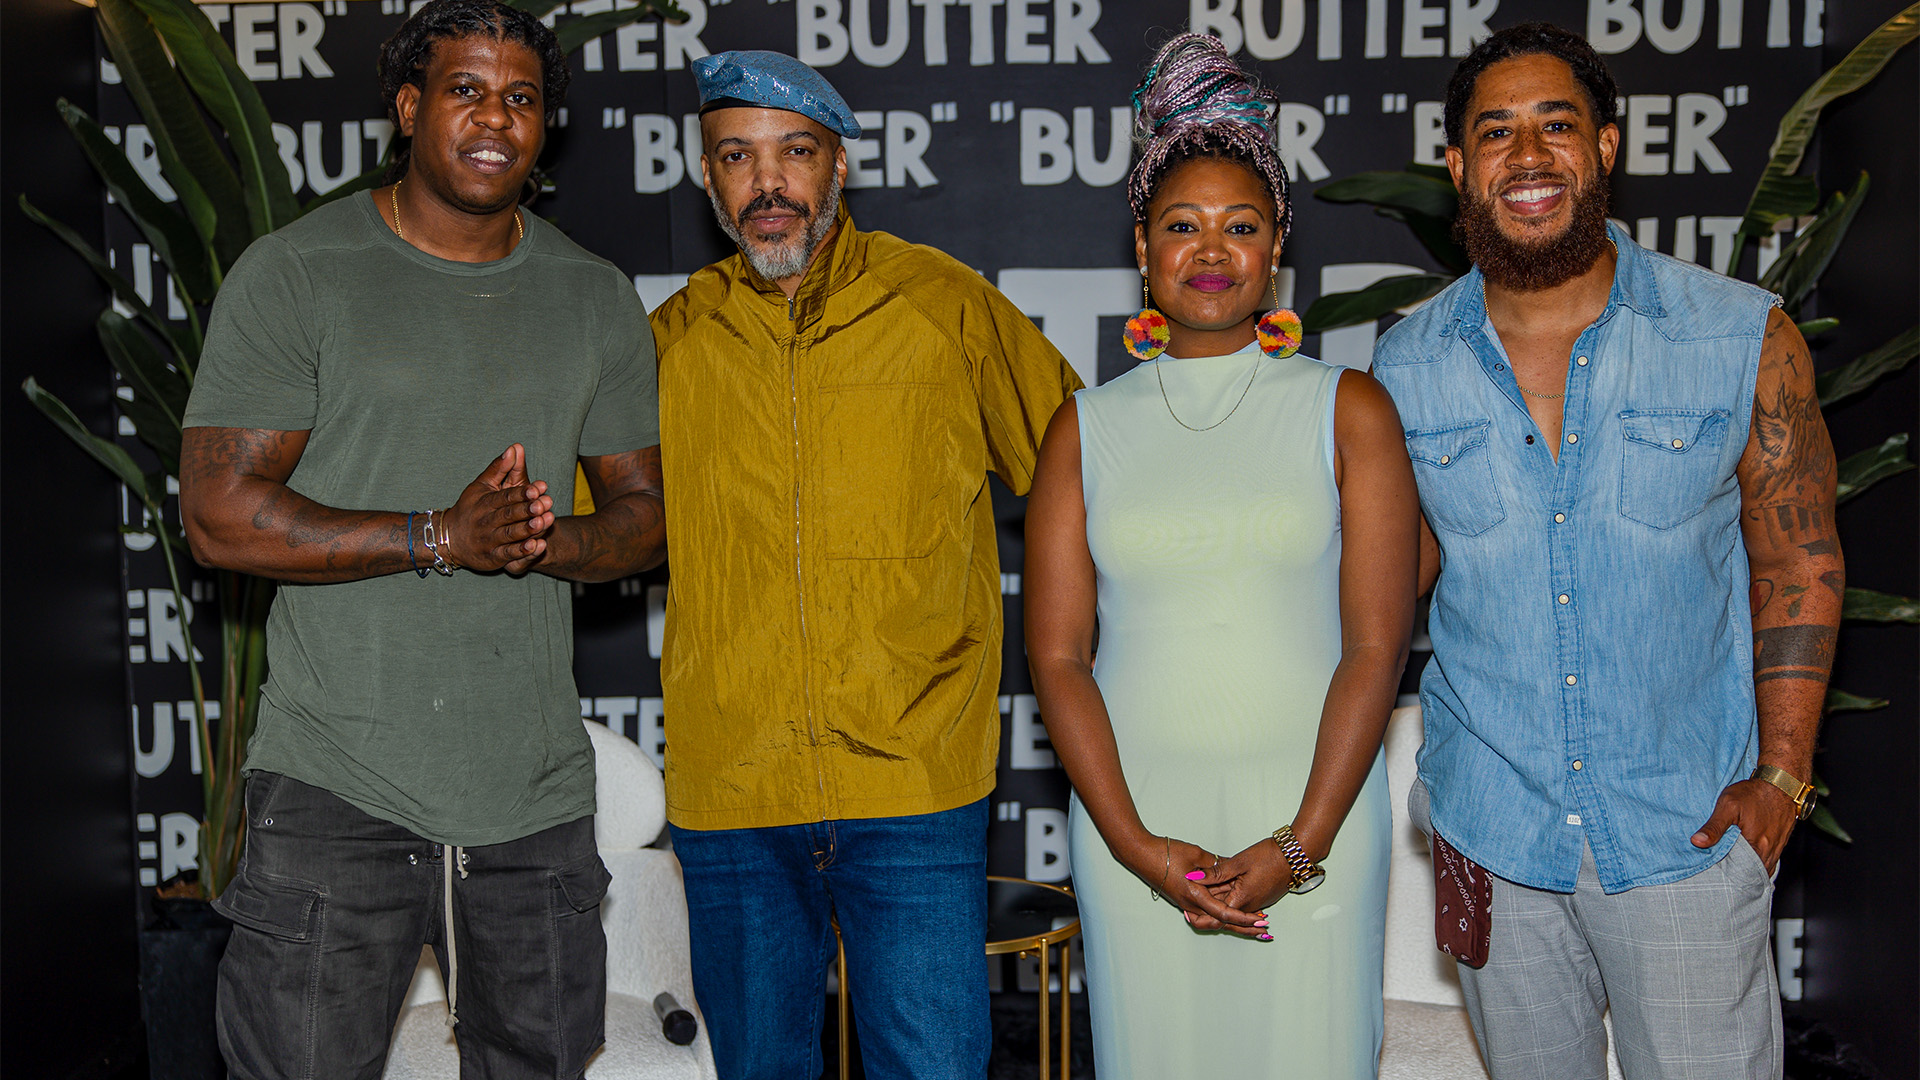 BUTTER Celebrates Black Art As A First-Of-Its-Kind Fair Putting 100% Of Sales Into The Artists' Pockets